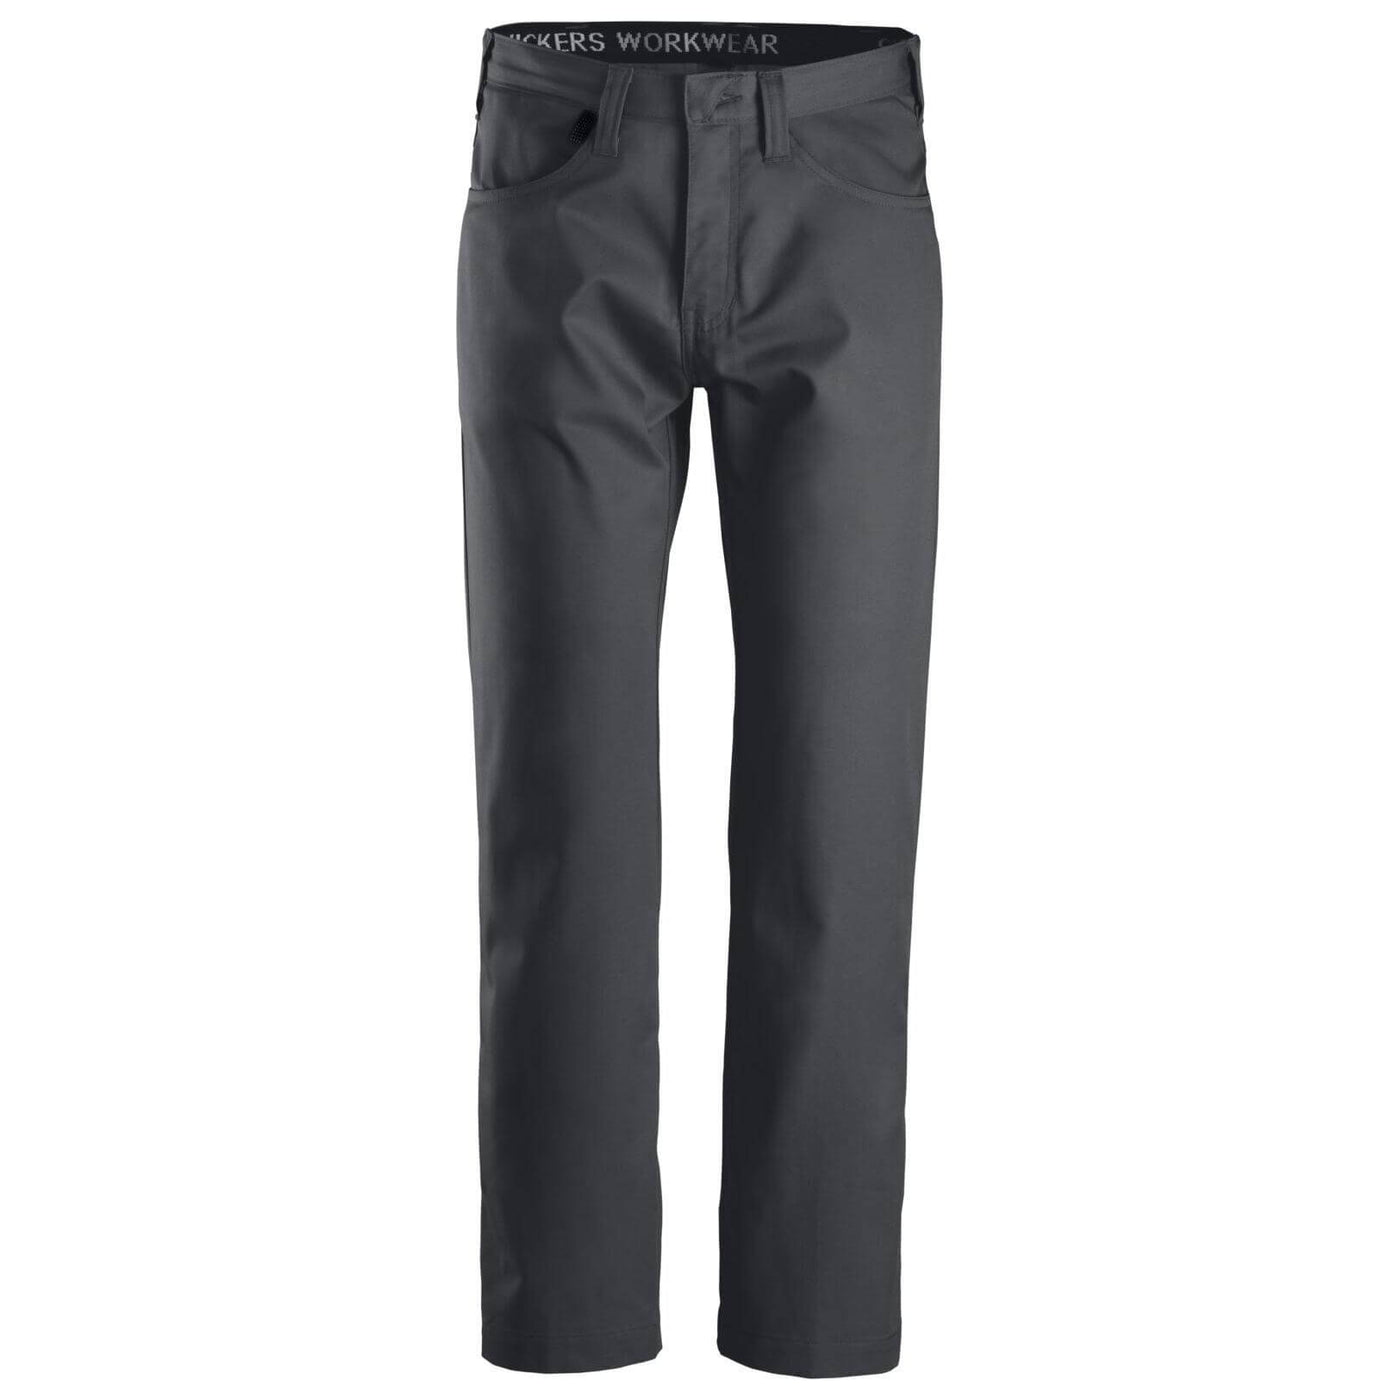 Snickers 6400 Service Chinos Steel Grey